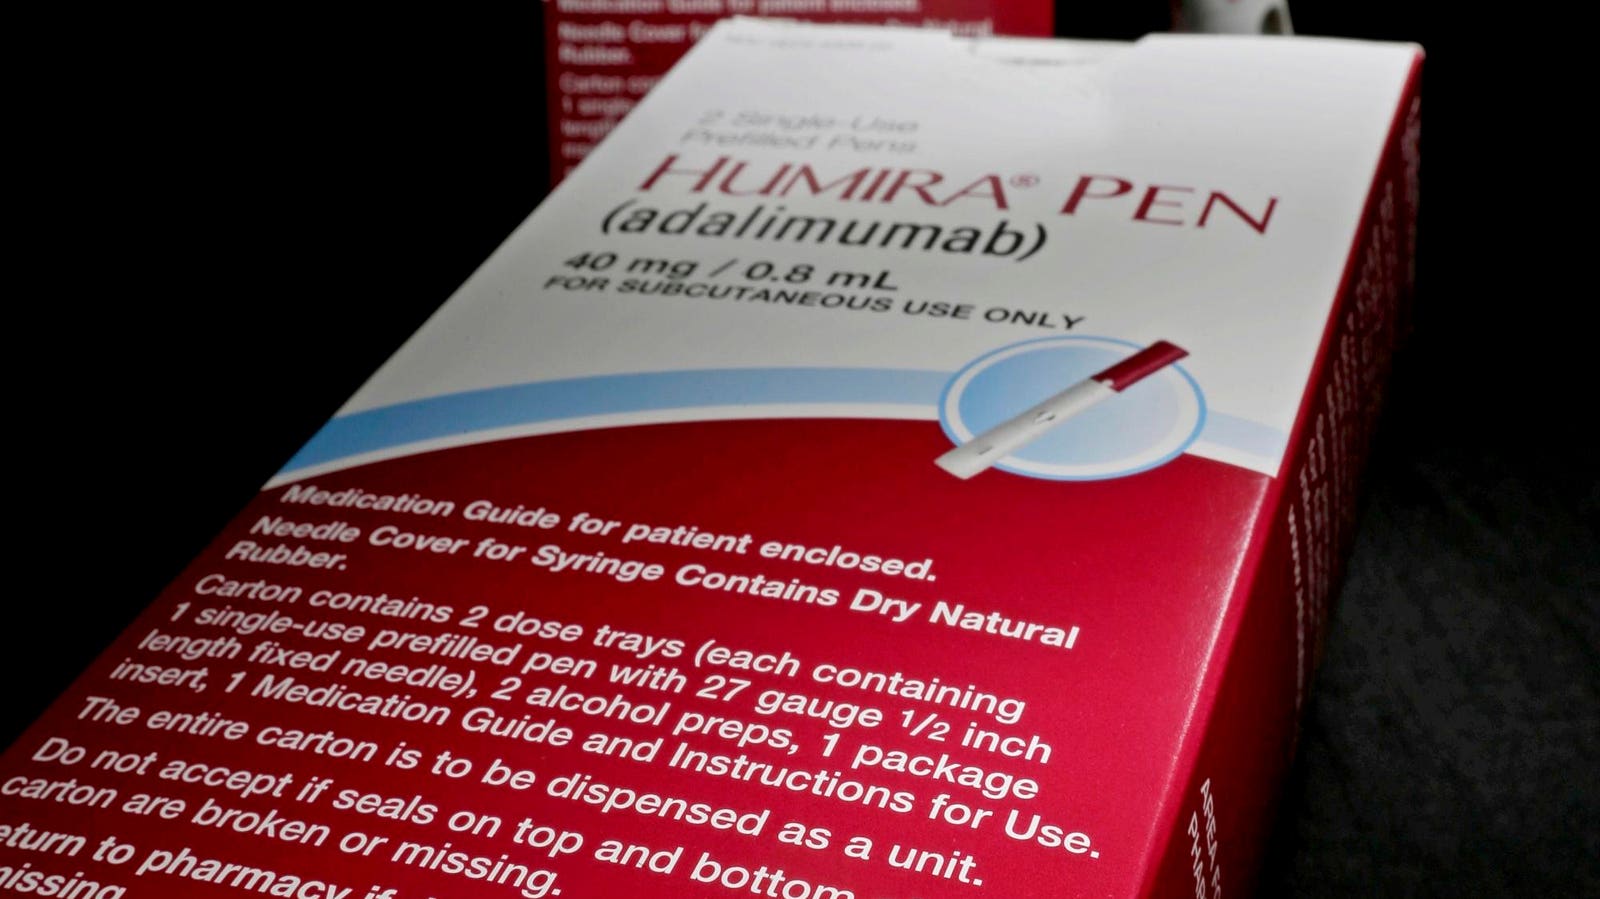 CVS Partially Dropping Top-Selling Drug Humira In Favor Of Cheaper